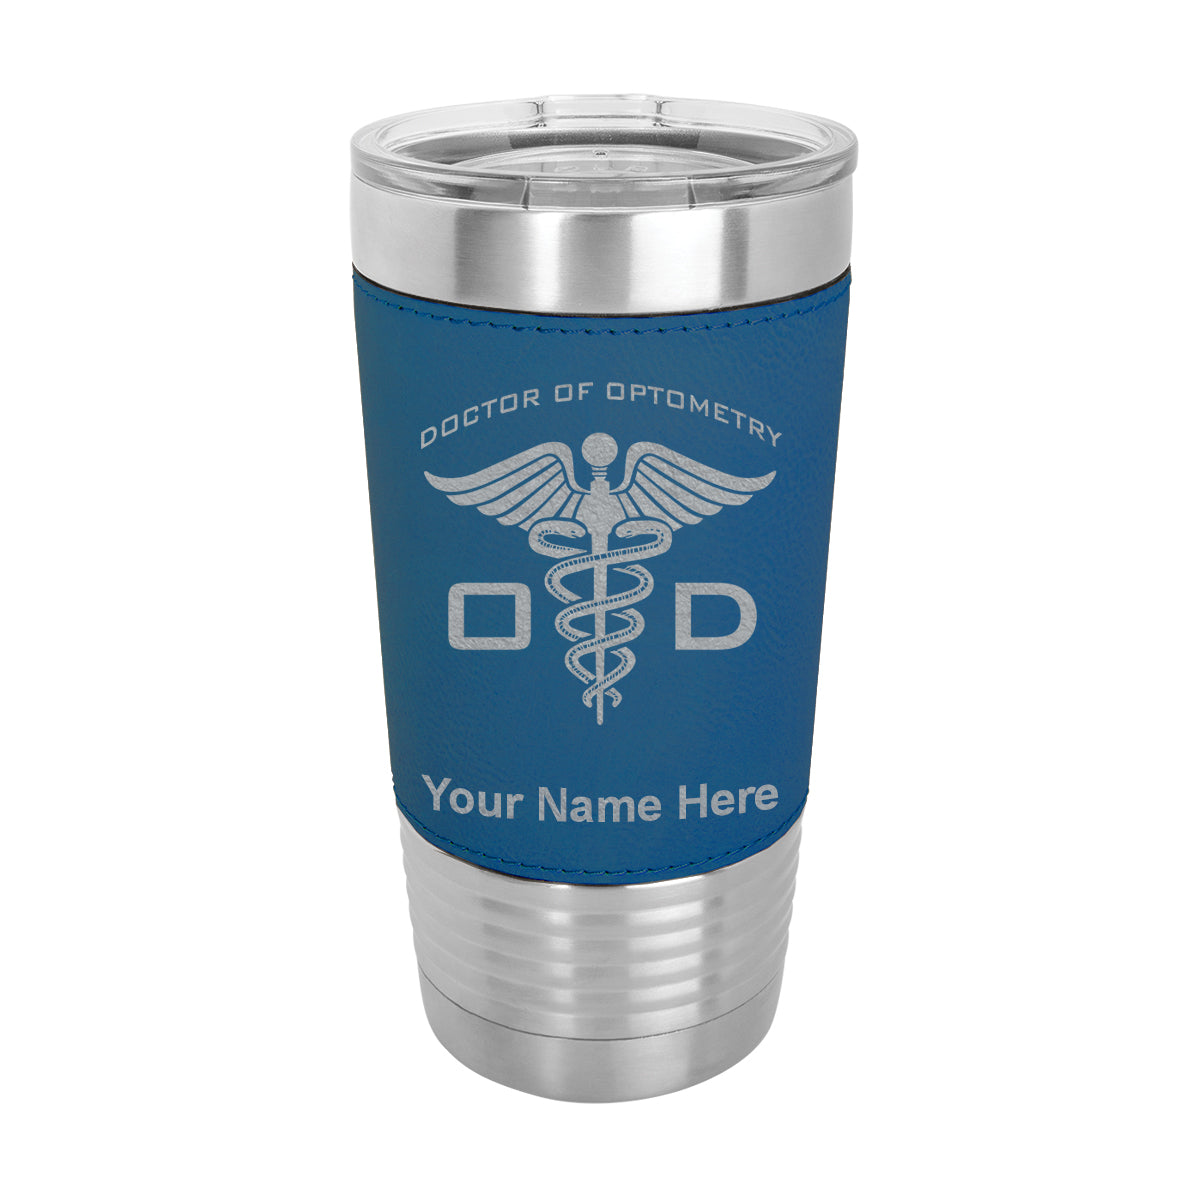 20oz Faux Leather Tumbler Mug, OD Doctor of Optometry, Personalized Engraving Included - LaserGram Custom Engraved Gifts